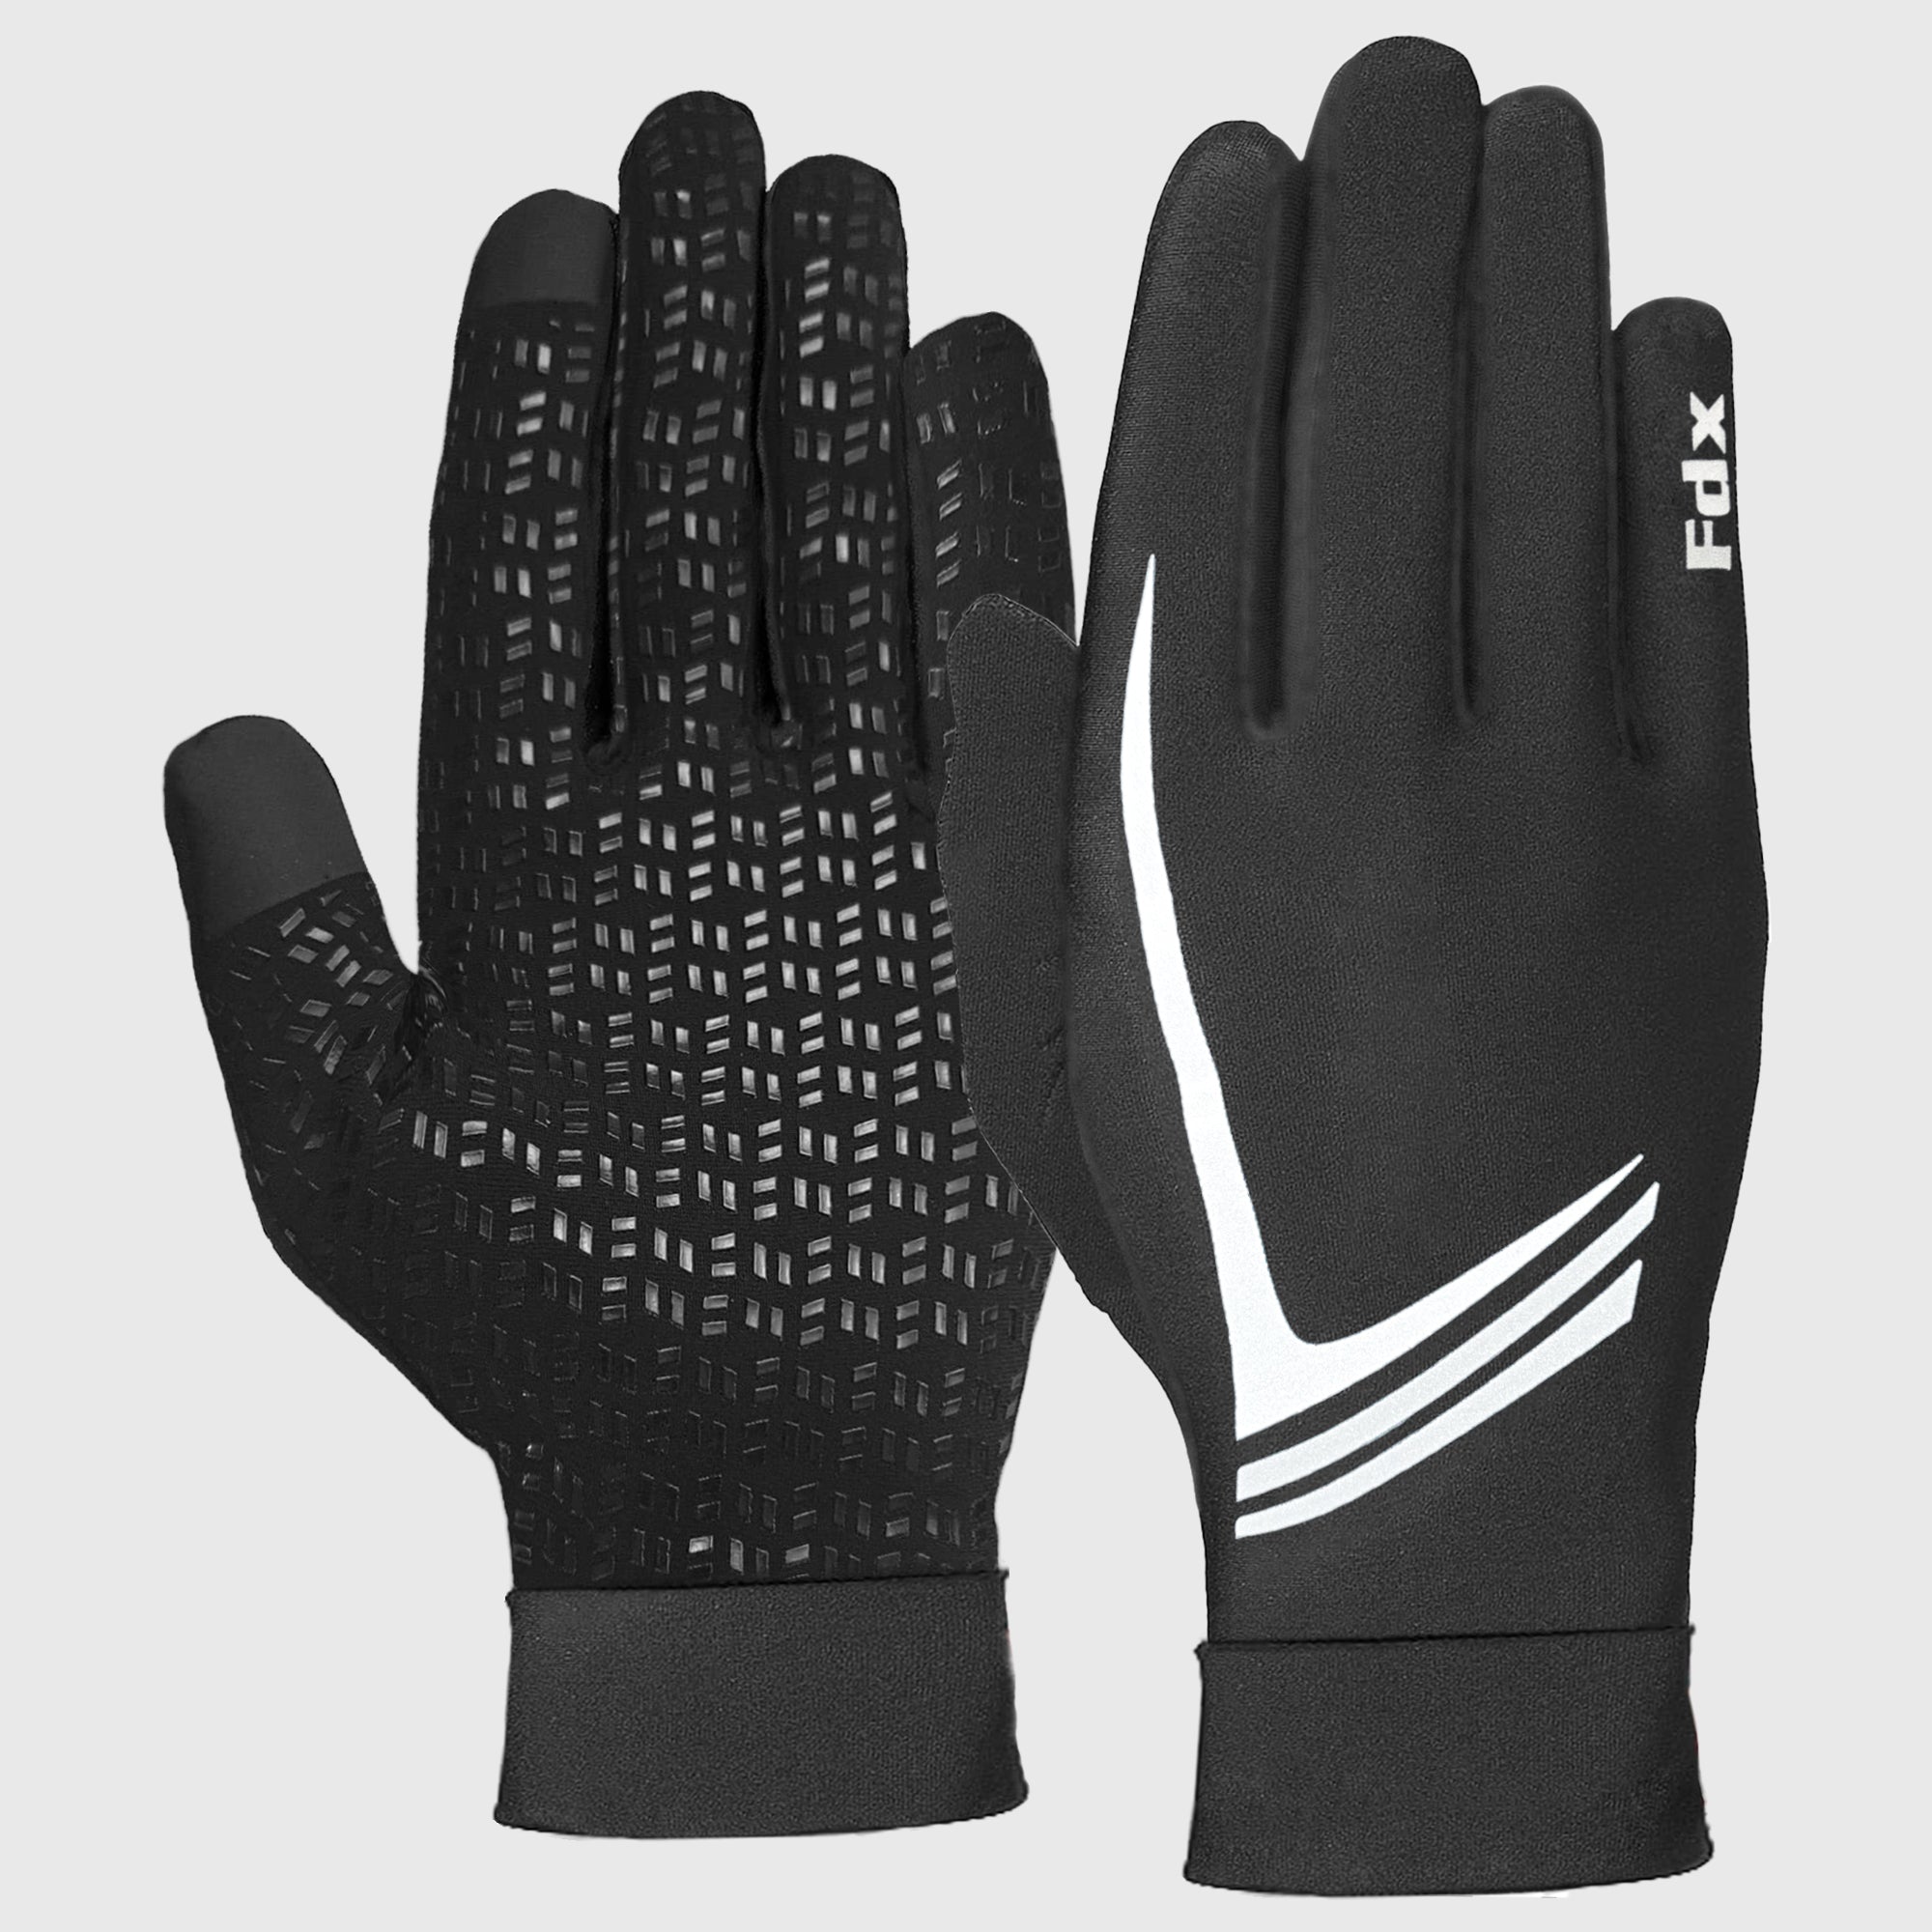 FDX Aero Full Finger Winter Cycling Gloves Gel padded Silicon Gripper Anti Slip Reflective Details Long Cuffs UK